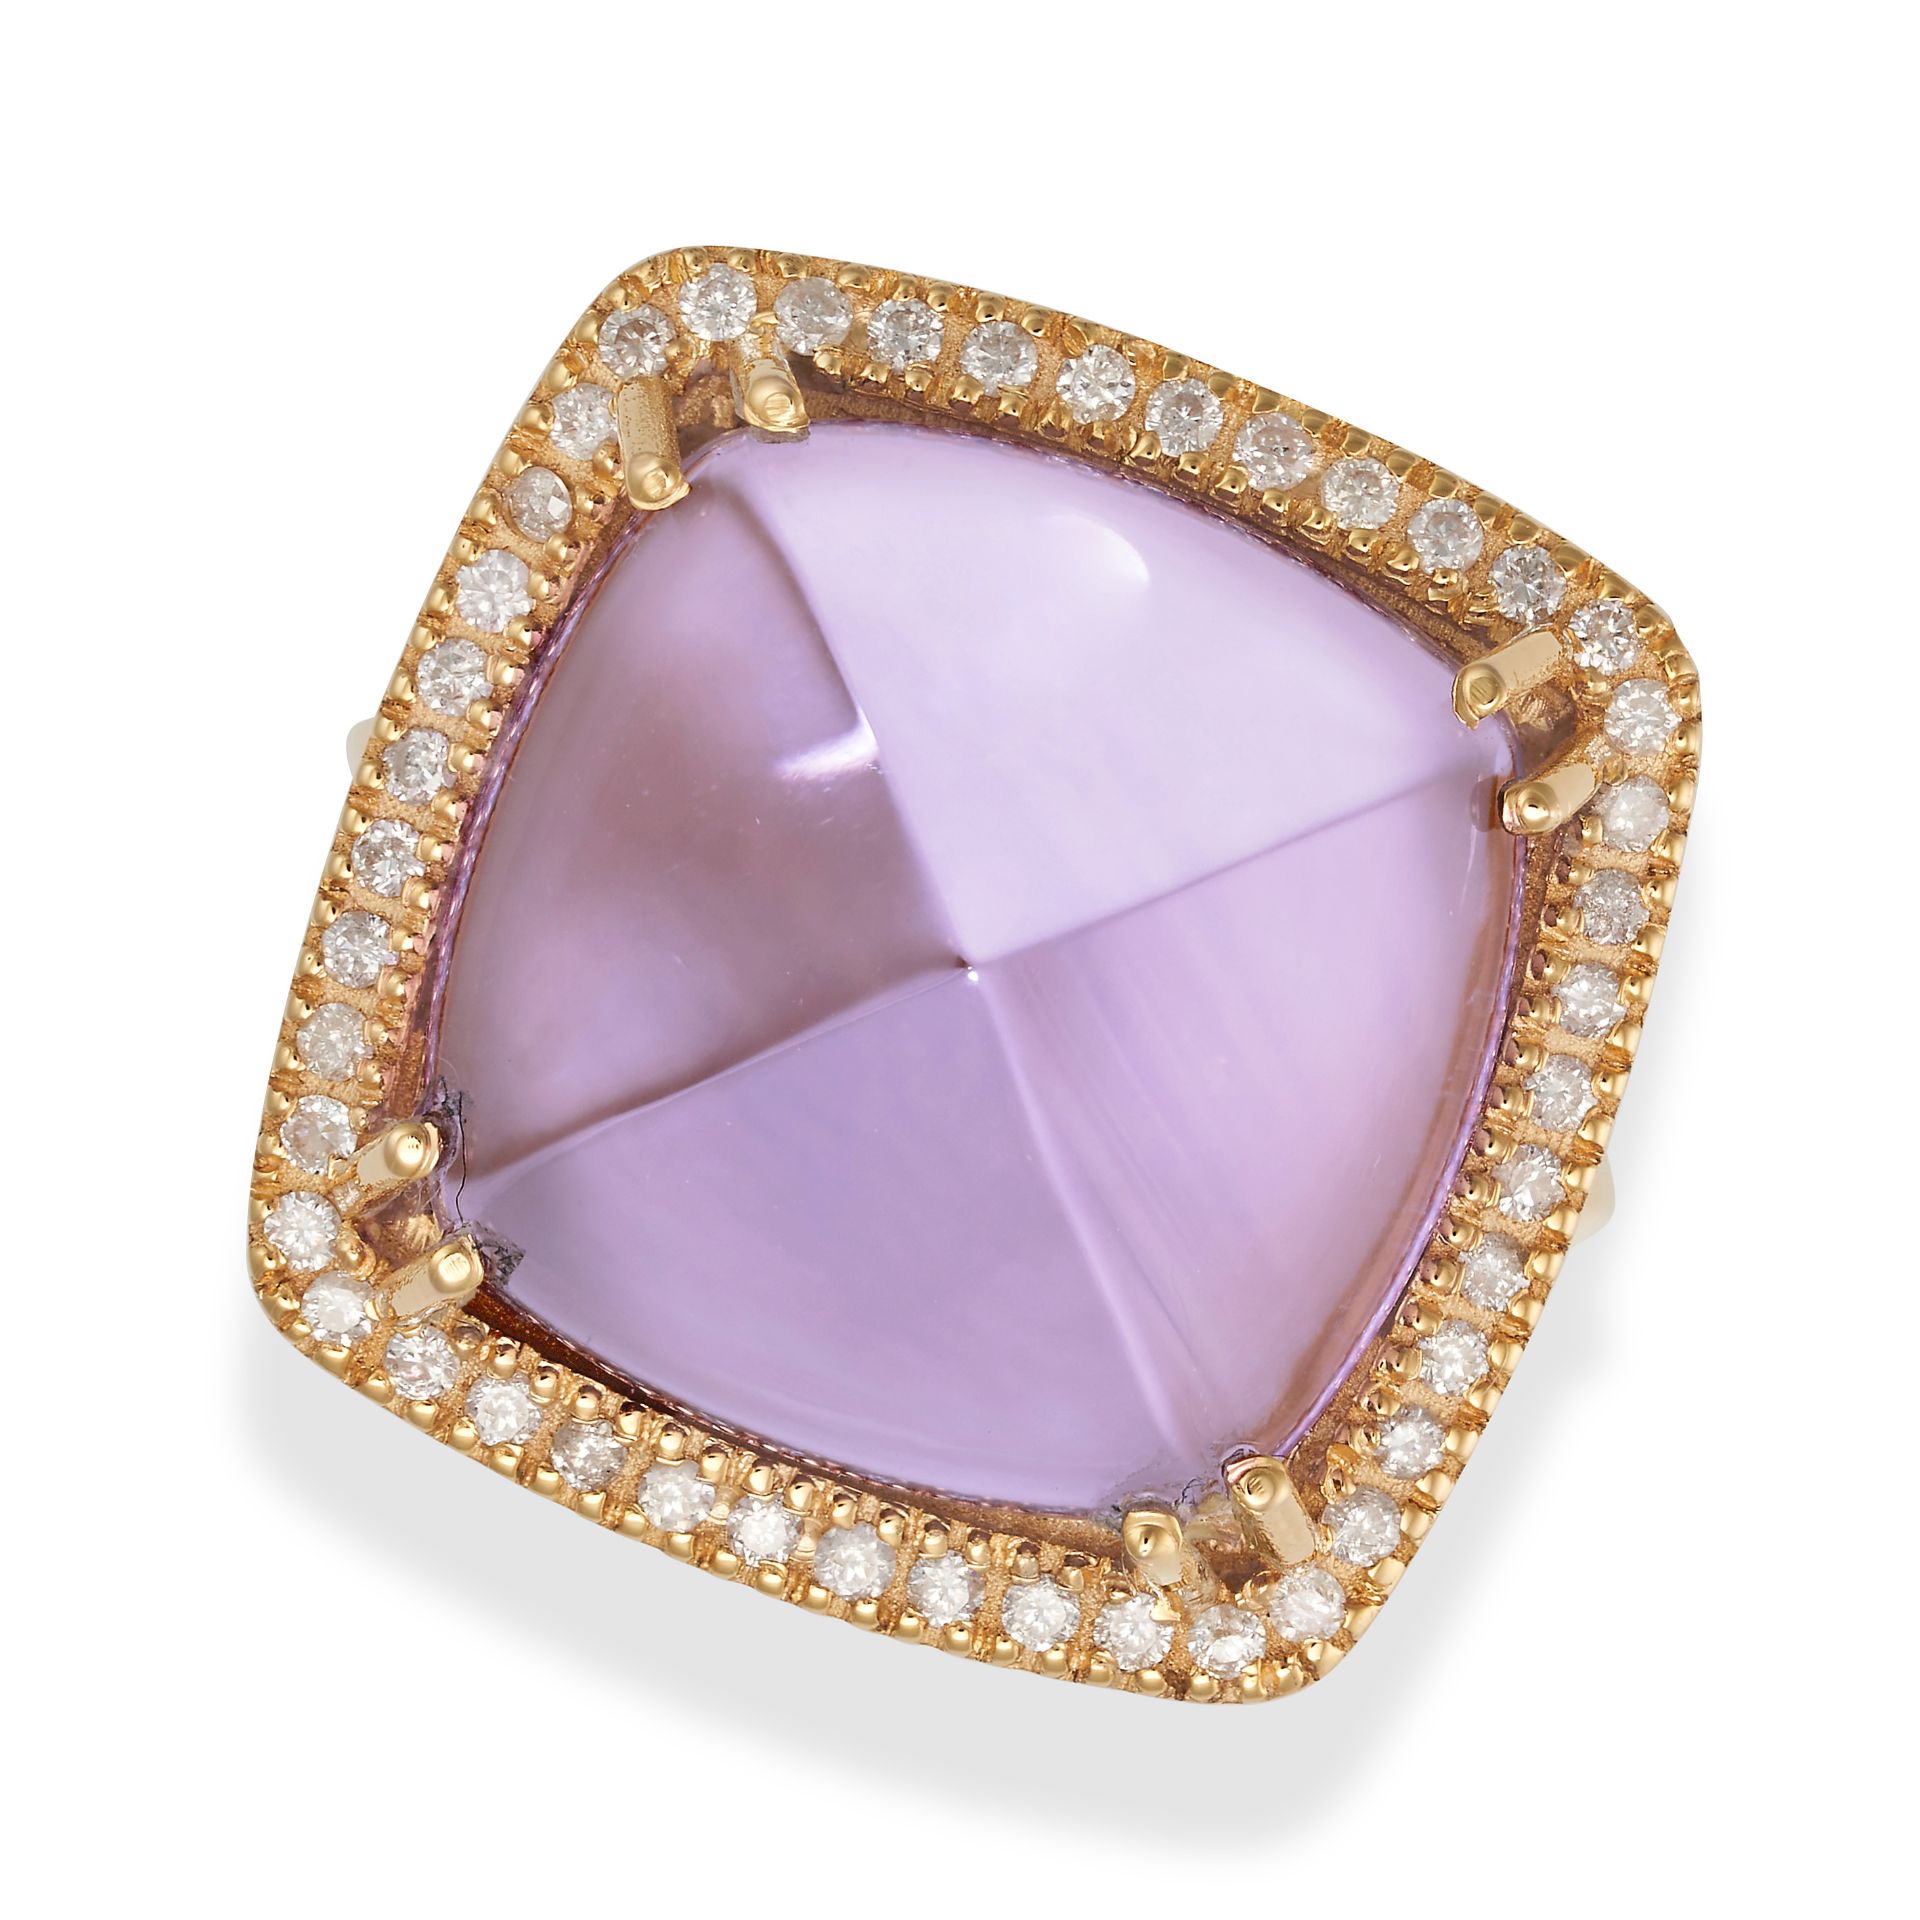 AN AMETHYST AND DIAMOND RING set with a sugarloaf cabochon amethyst in a border of round cut diam...